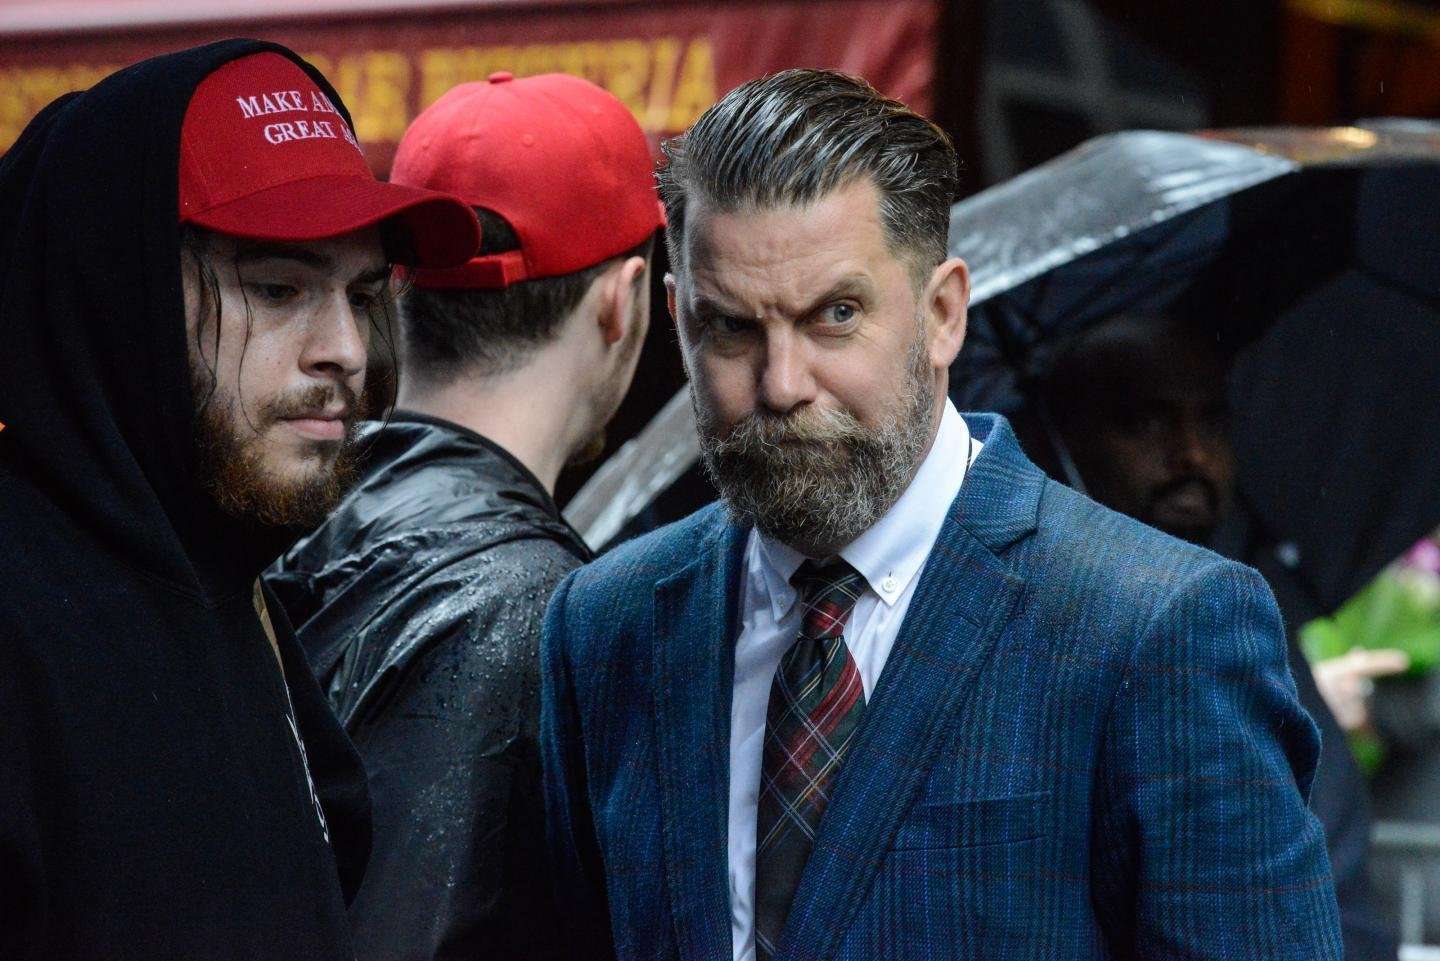 image for Trump-Supporting 'Proud Boys' Group Will Be Investigated by New York Hate Crimes Unit After Violence in Manhattan